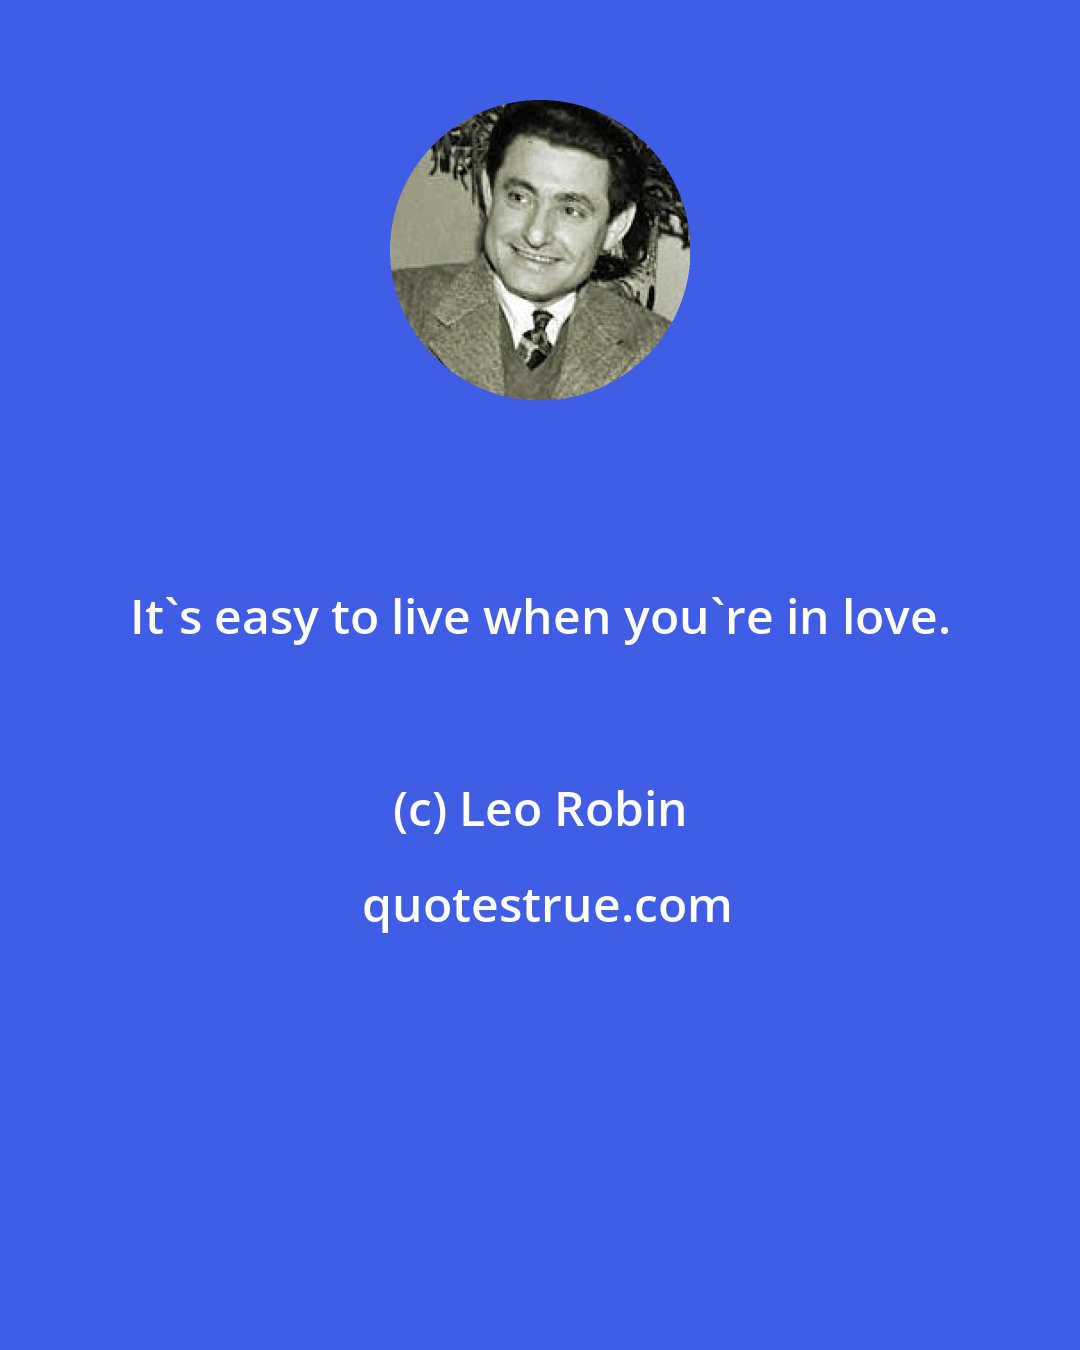 Leo Robin: It's easy to live when you're in love.